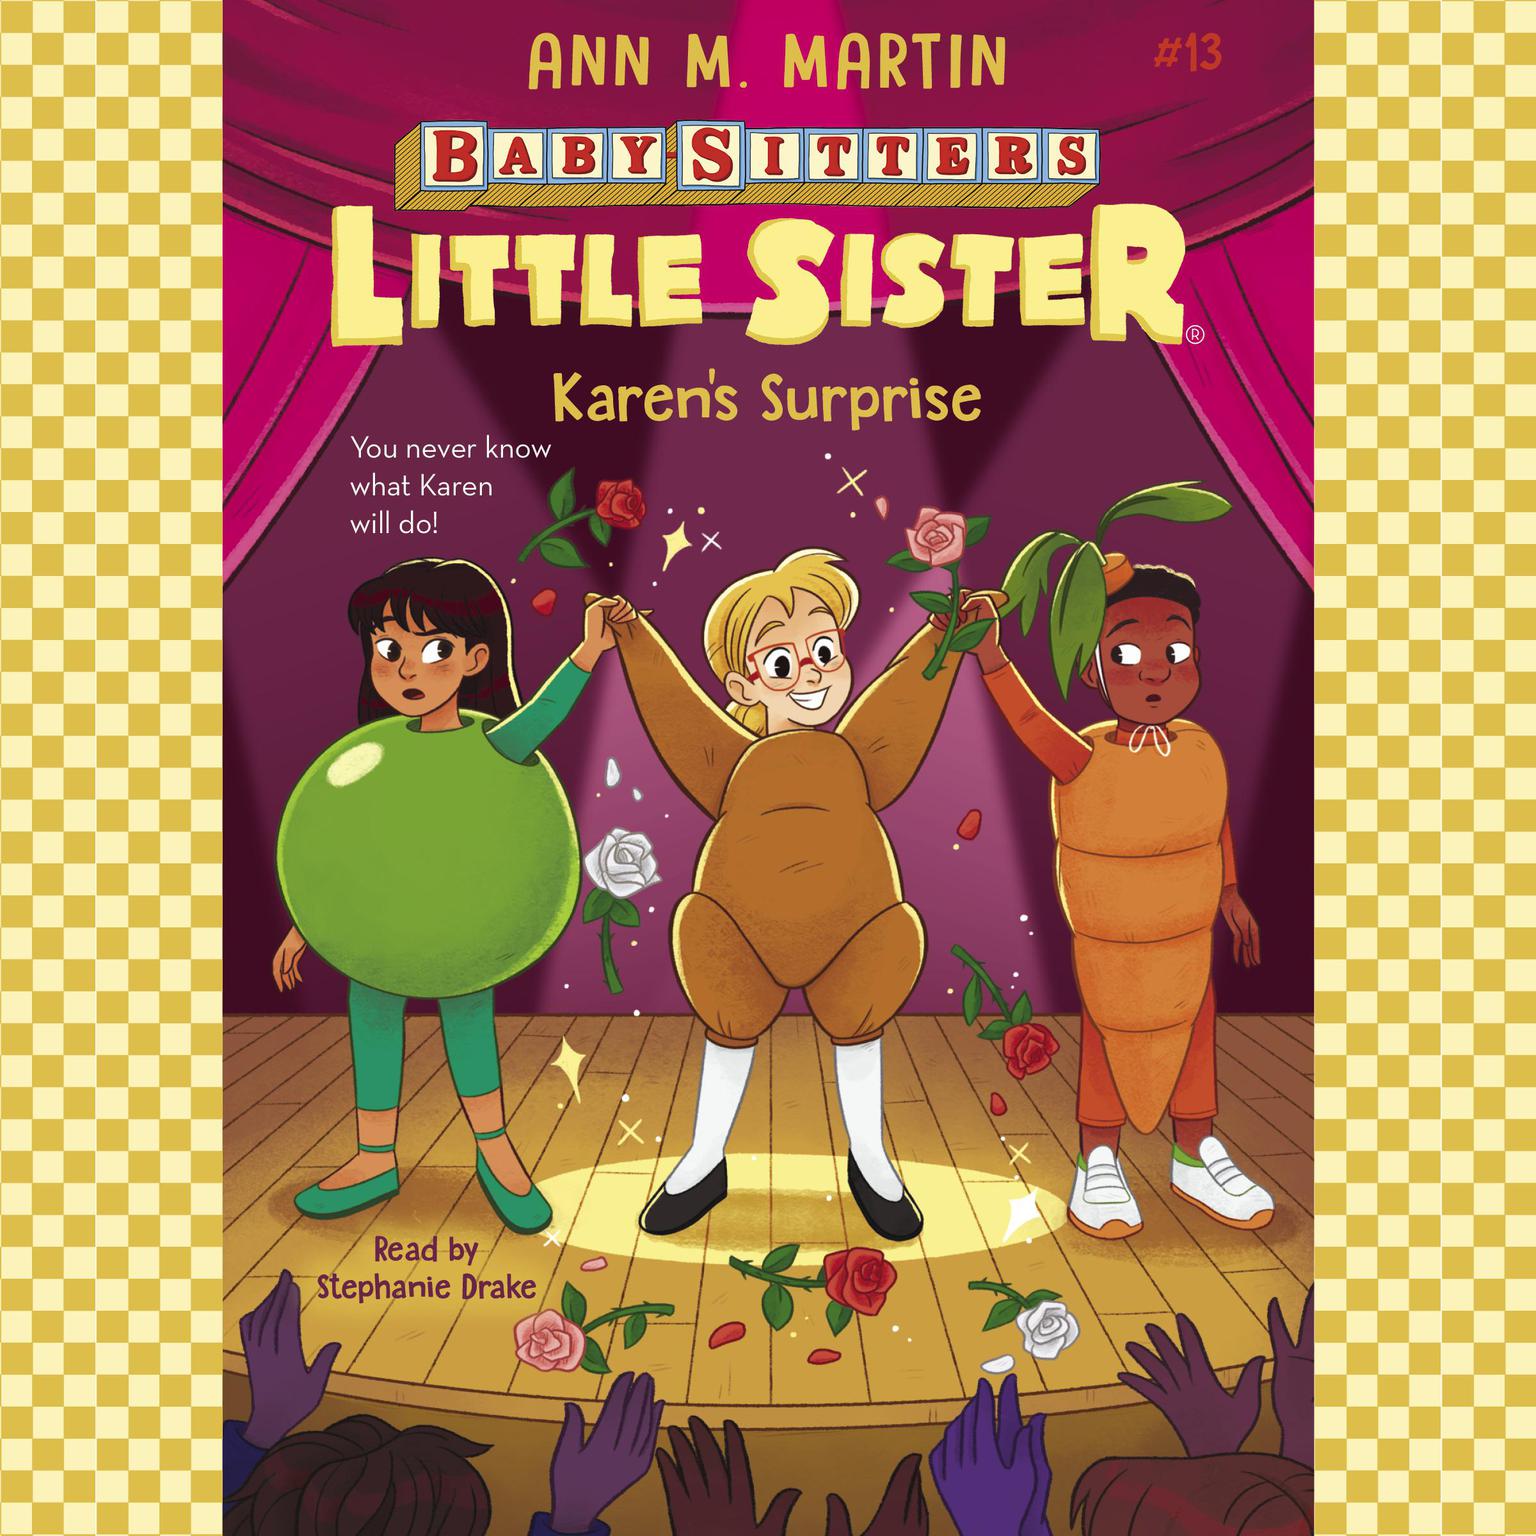 Karens Surprise (Baby-sitters Little Sister #13) Audiobook, by Ann M. Martin